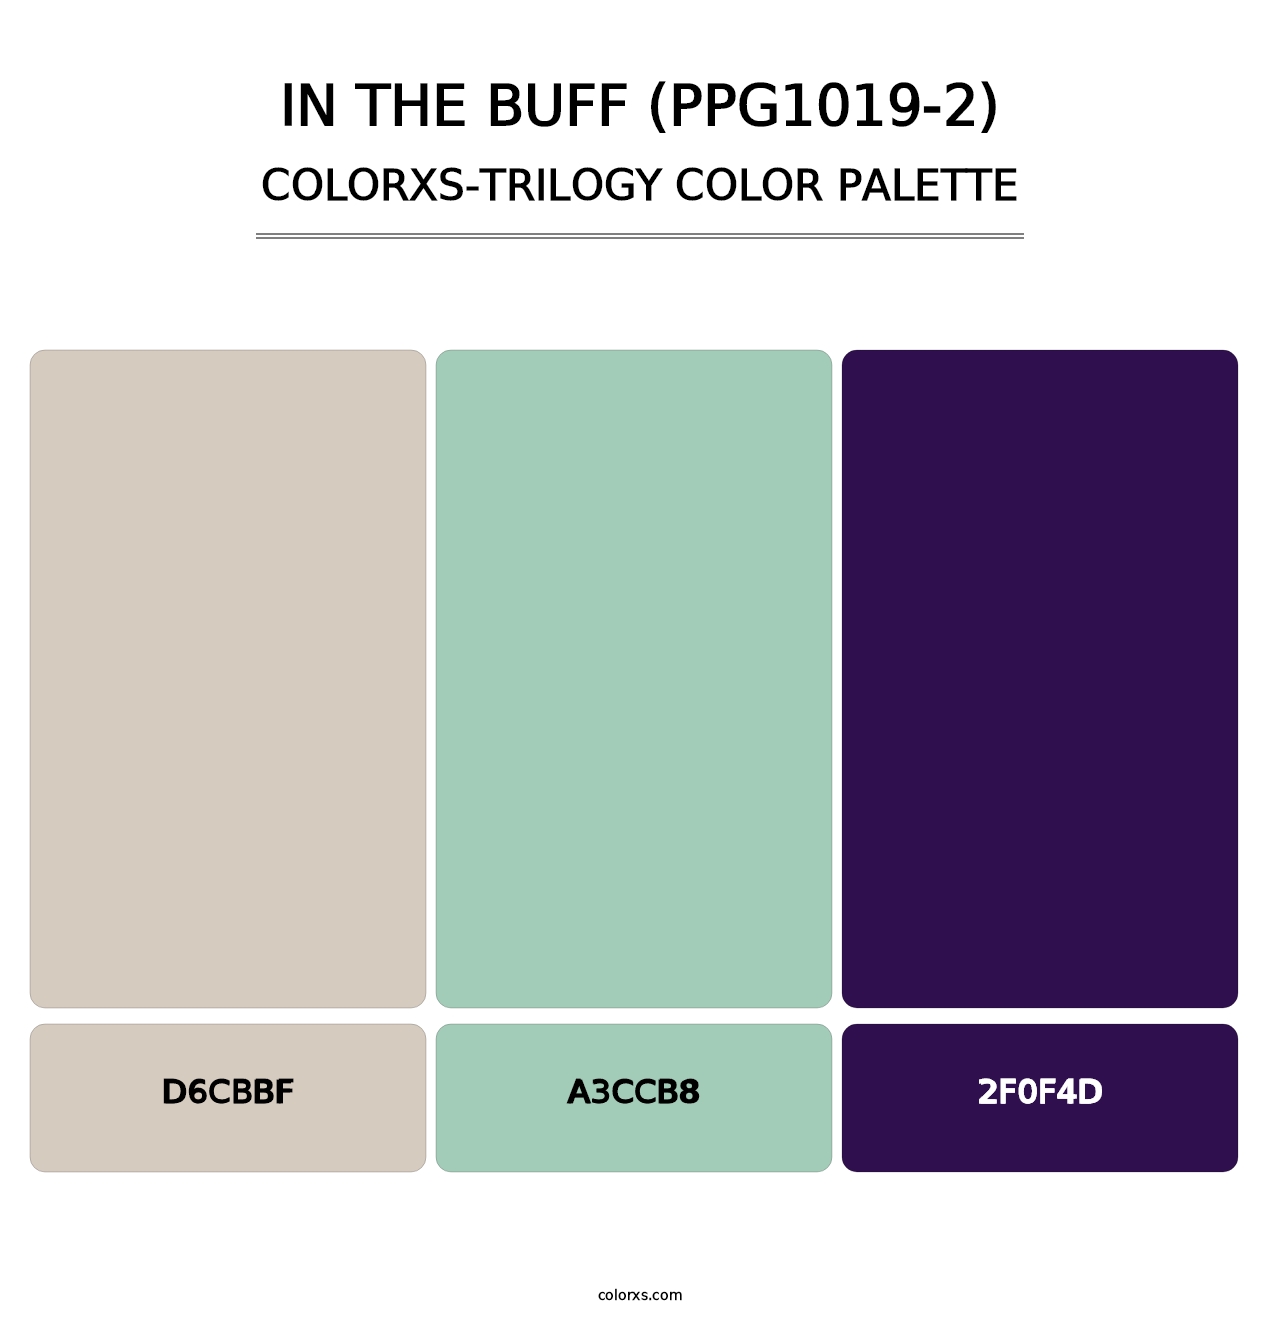 In The Buff (PPG1019-2) - Colorxs Trilogy Palette